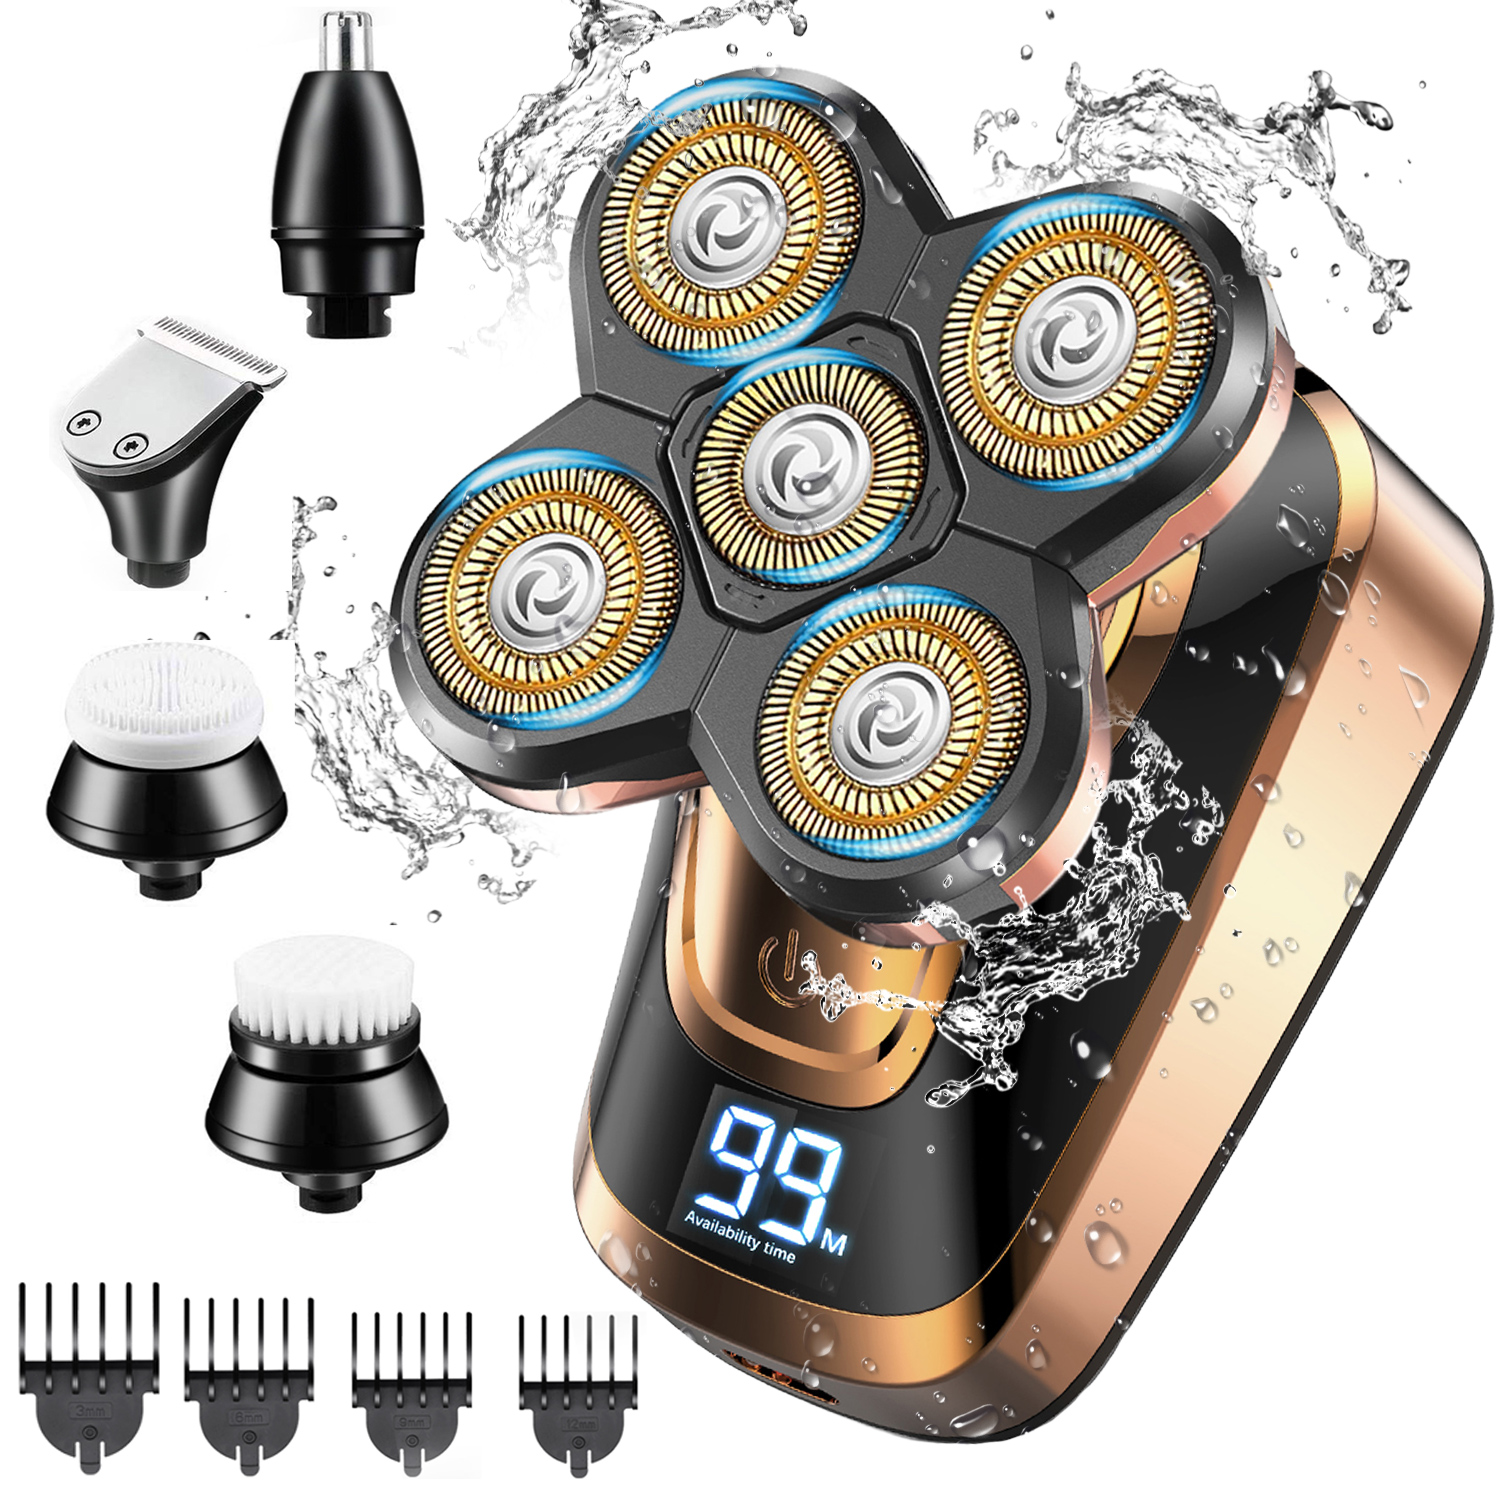 Head Shavers for Bald Men,CHLANT 5 in 1 Electric Razor for Men Wet&Dry  Waterproof,Men's Electric Shaver Cordless Rechargeable Bald Head Shaver for  Men with Nose Beard Trimmer Hair Clipper Facial Brush -